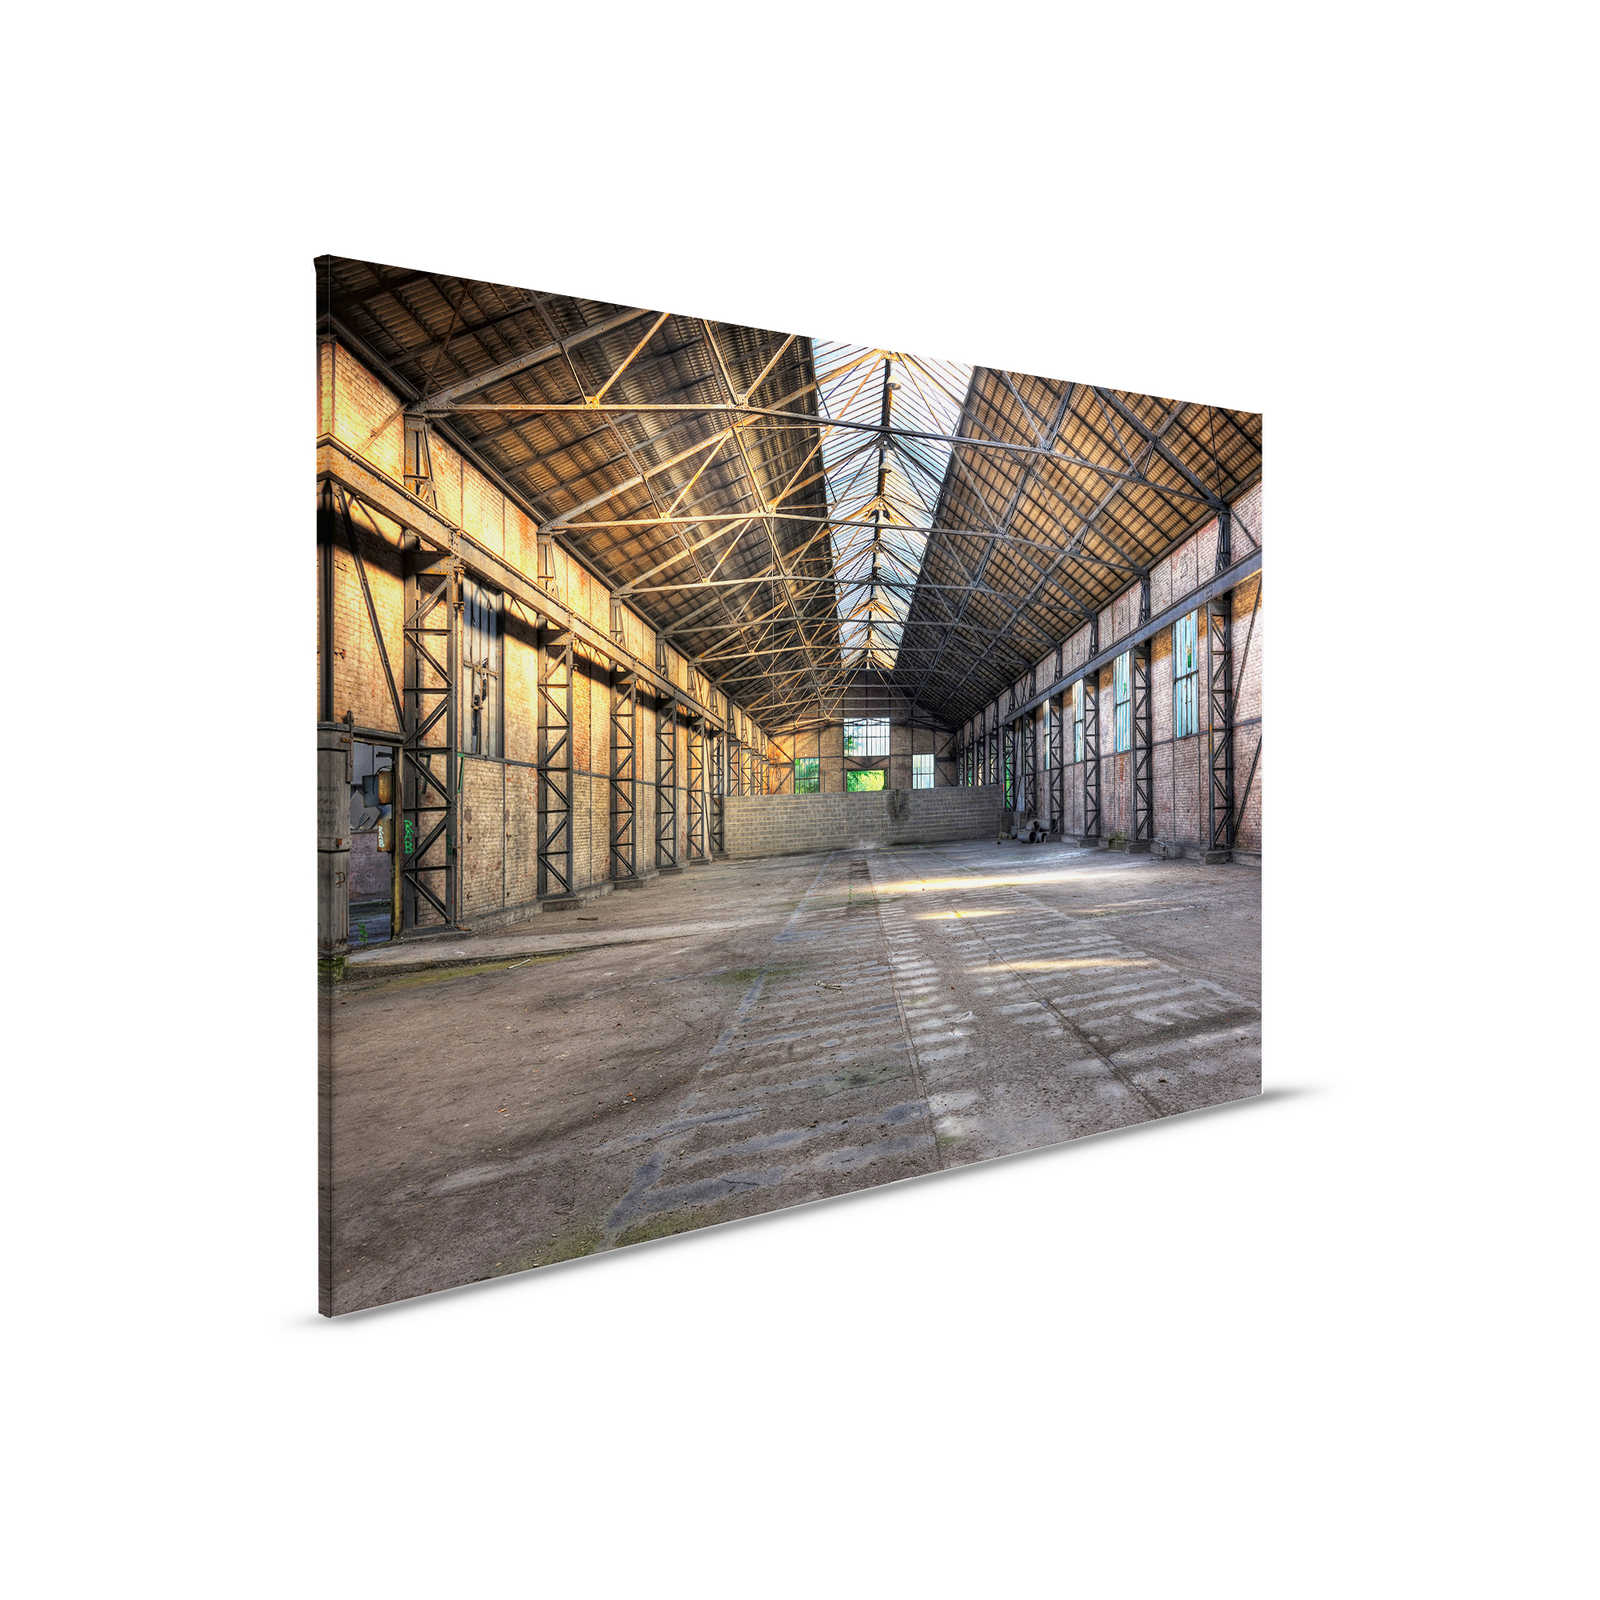         Canvas with abandoned industrial hall with 3D effect - 0.90 m x 0.60 m
    